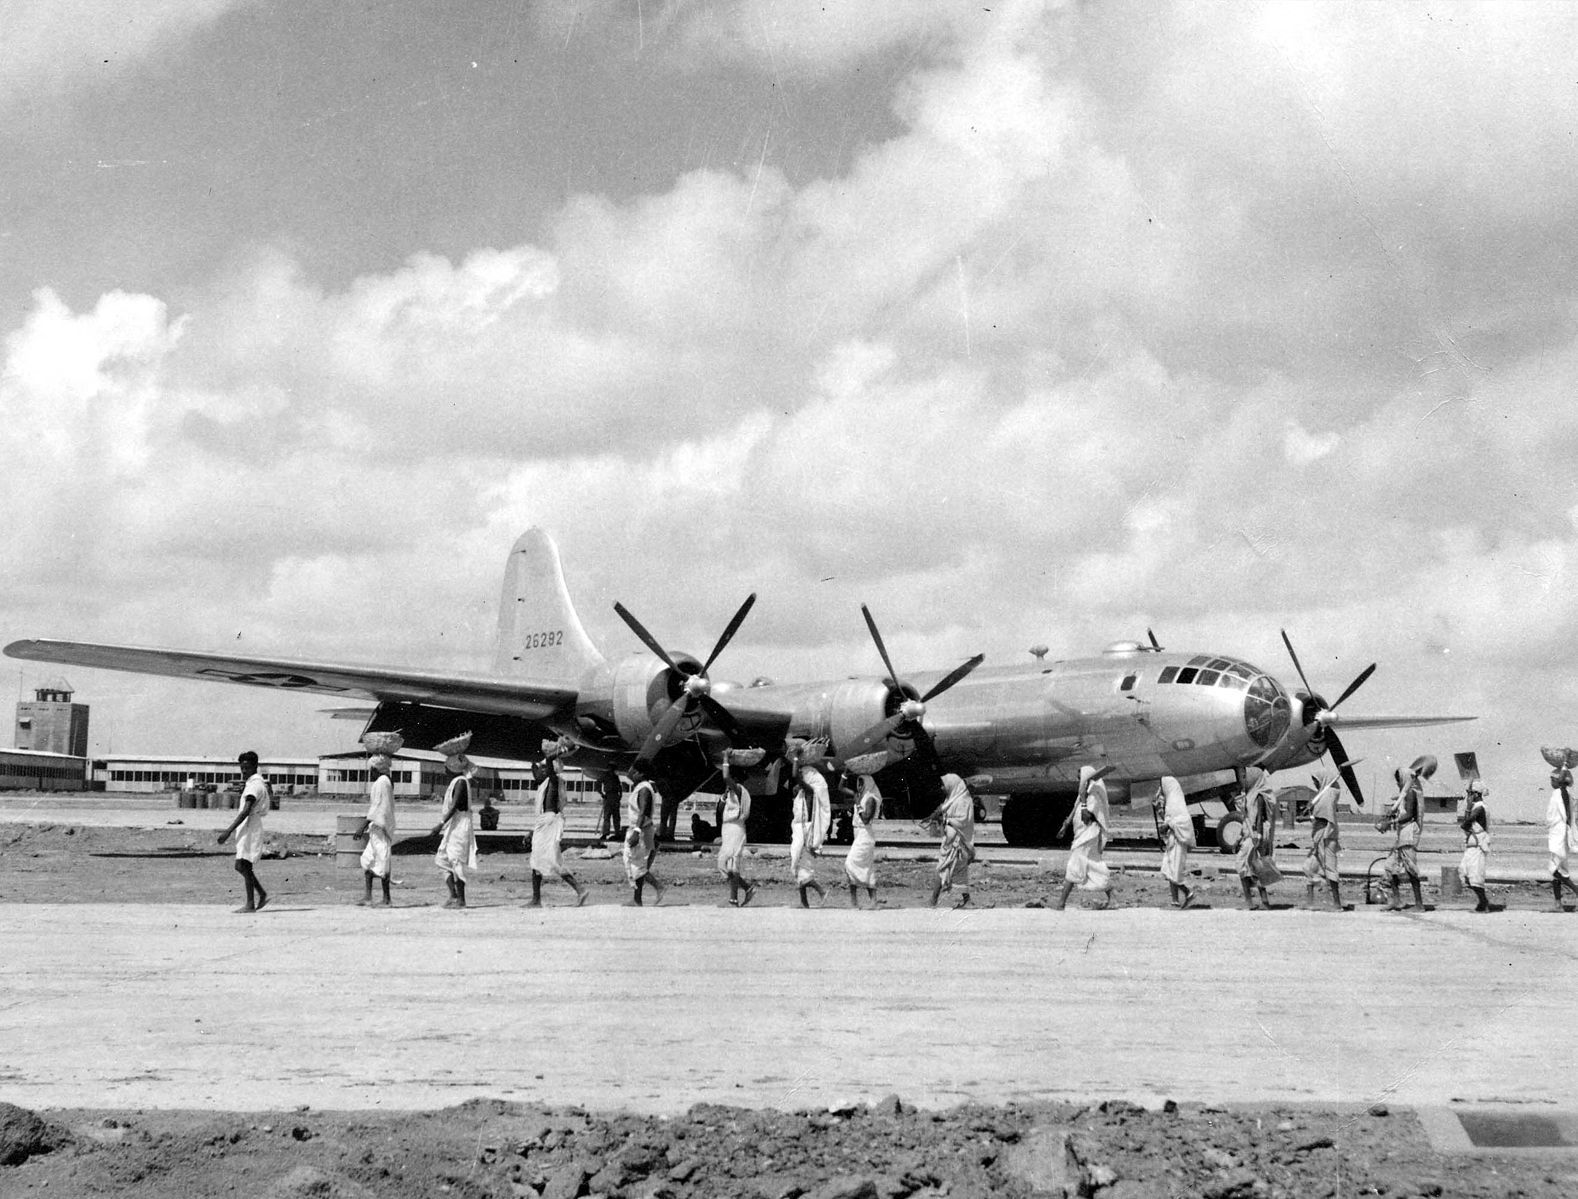 Boeing B-29 Superfortress in India for operation matterhorn